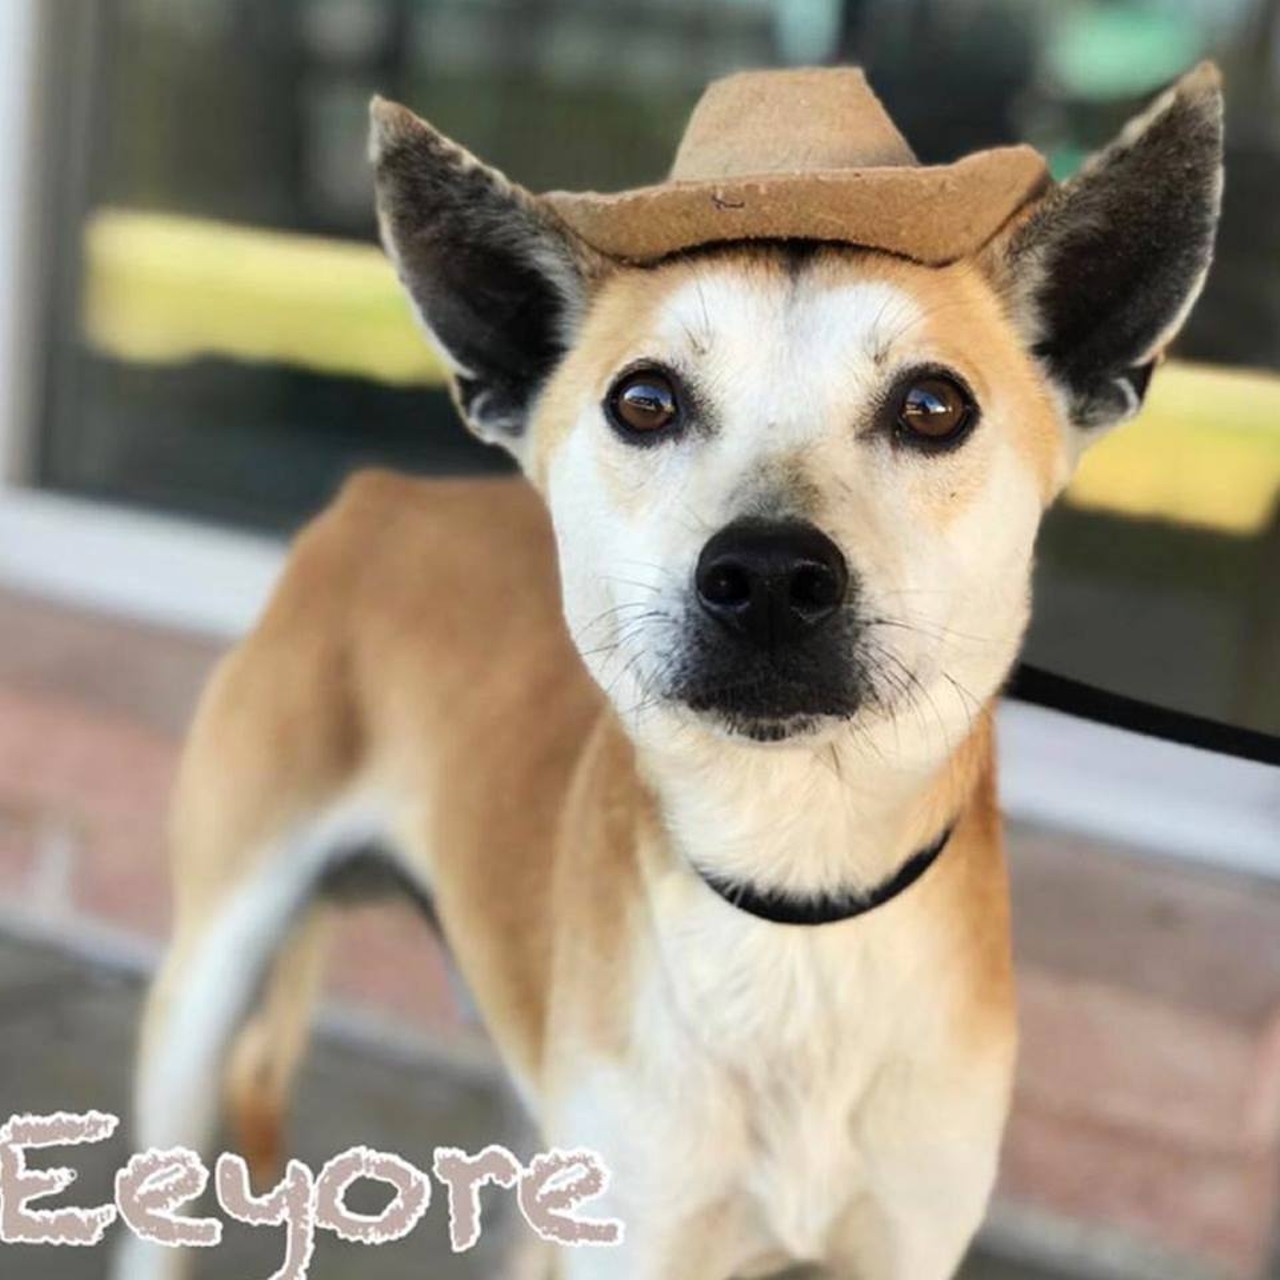 Eeyore
Howdy!  Eeyore is a spunky one-year-old terrier mix that is ready to ride off into the sunset together! He can take on any rodeo and is a great fit for a smaller home or even an apartment (though he certainly won't complain about more space!) You may need to teach him how to square dance, but he's a quick learner and can astound you with what he can pick up with just a few lessons. Terrier mix, 1 year old.